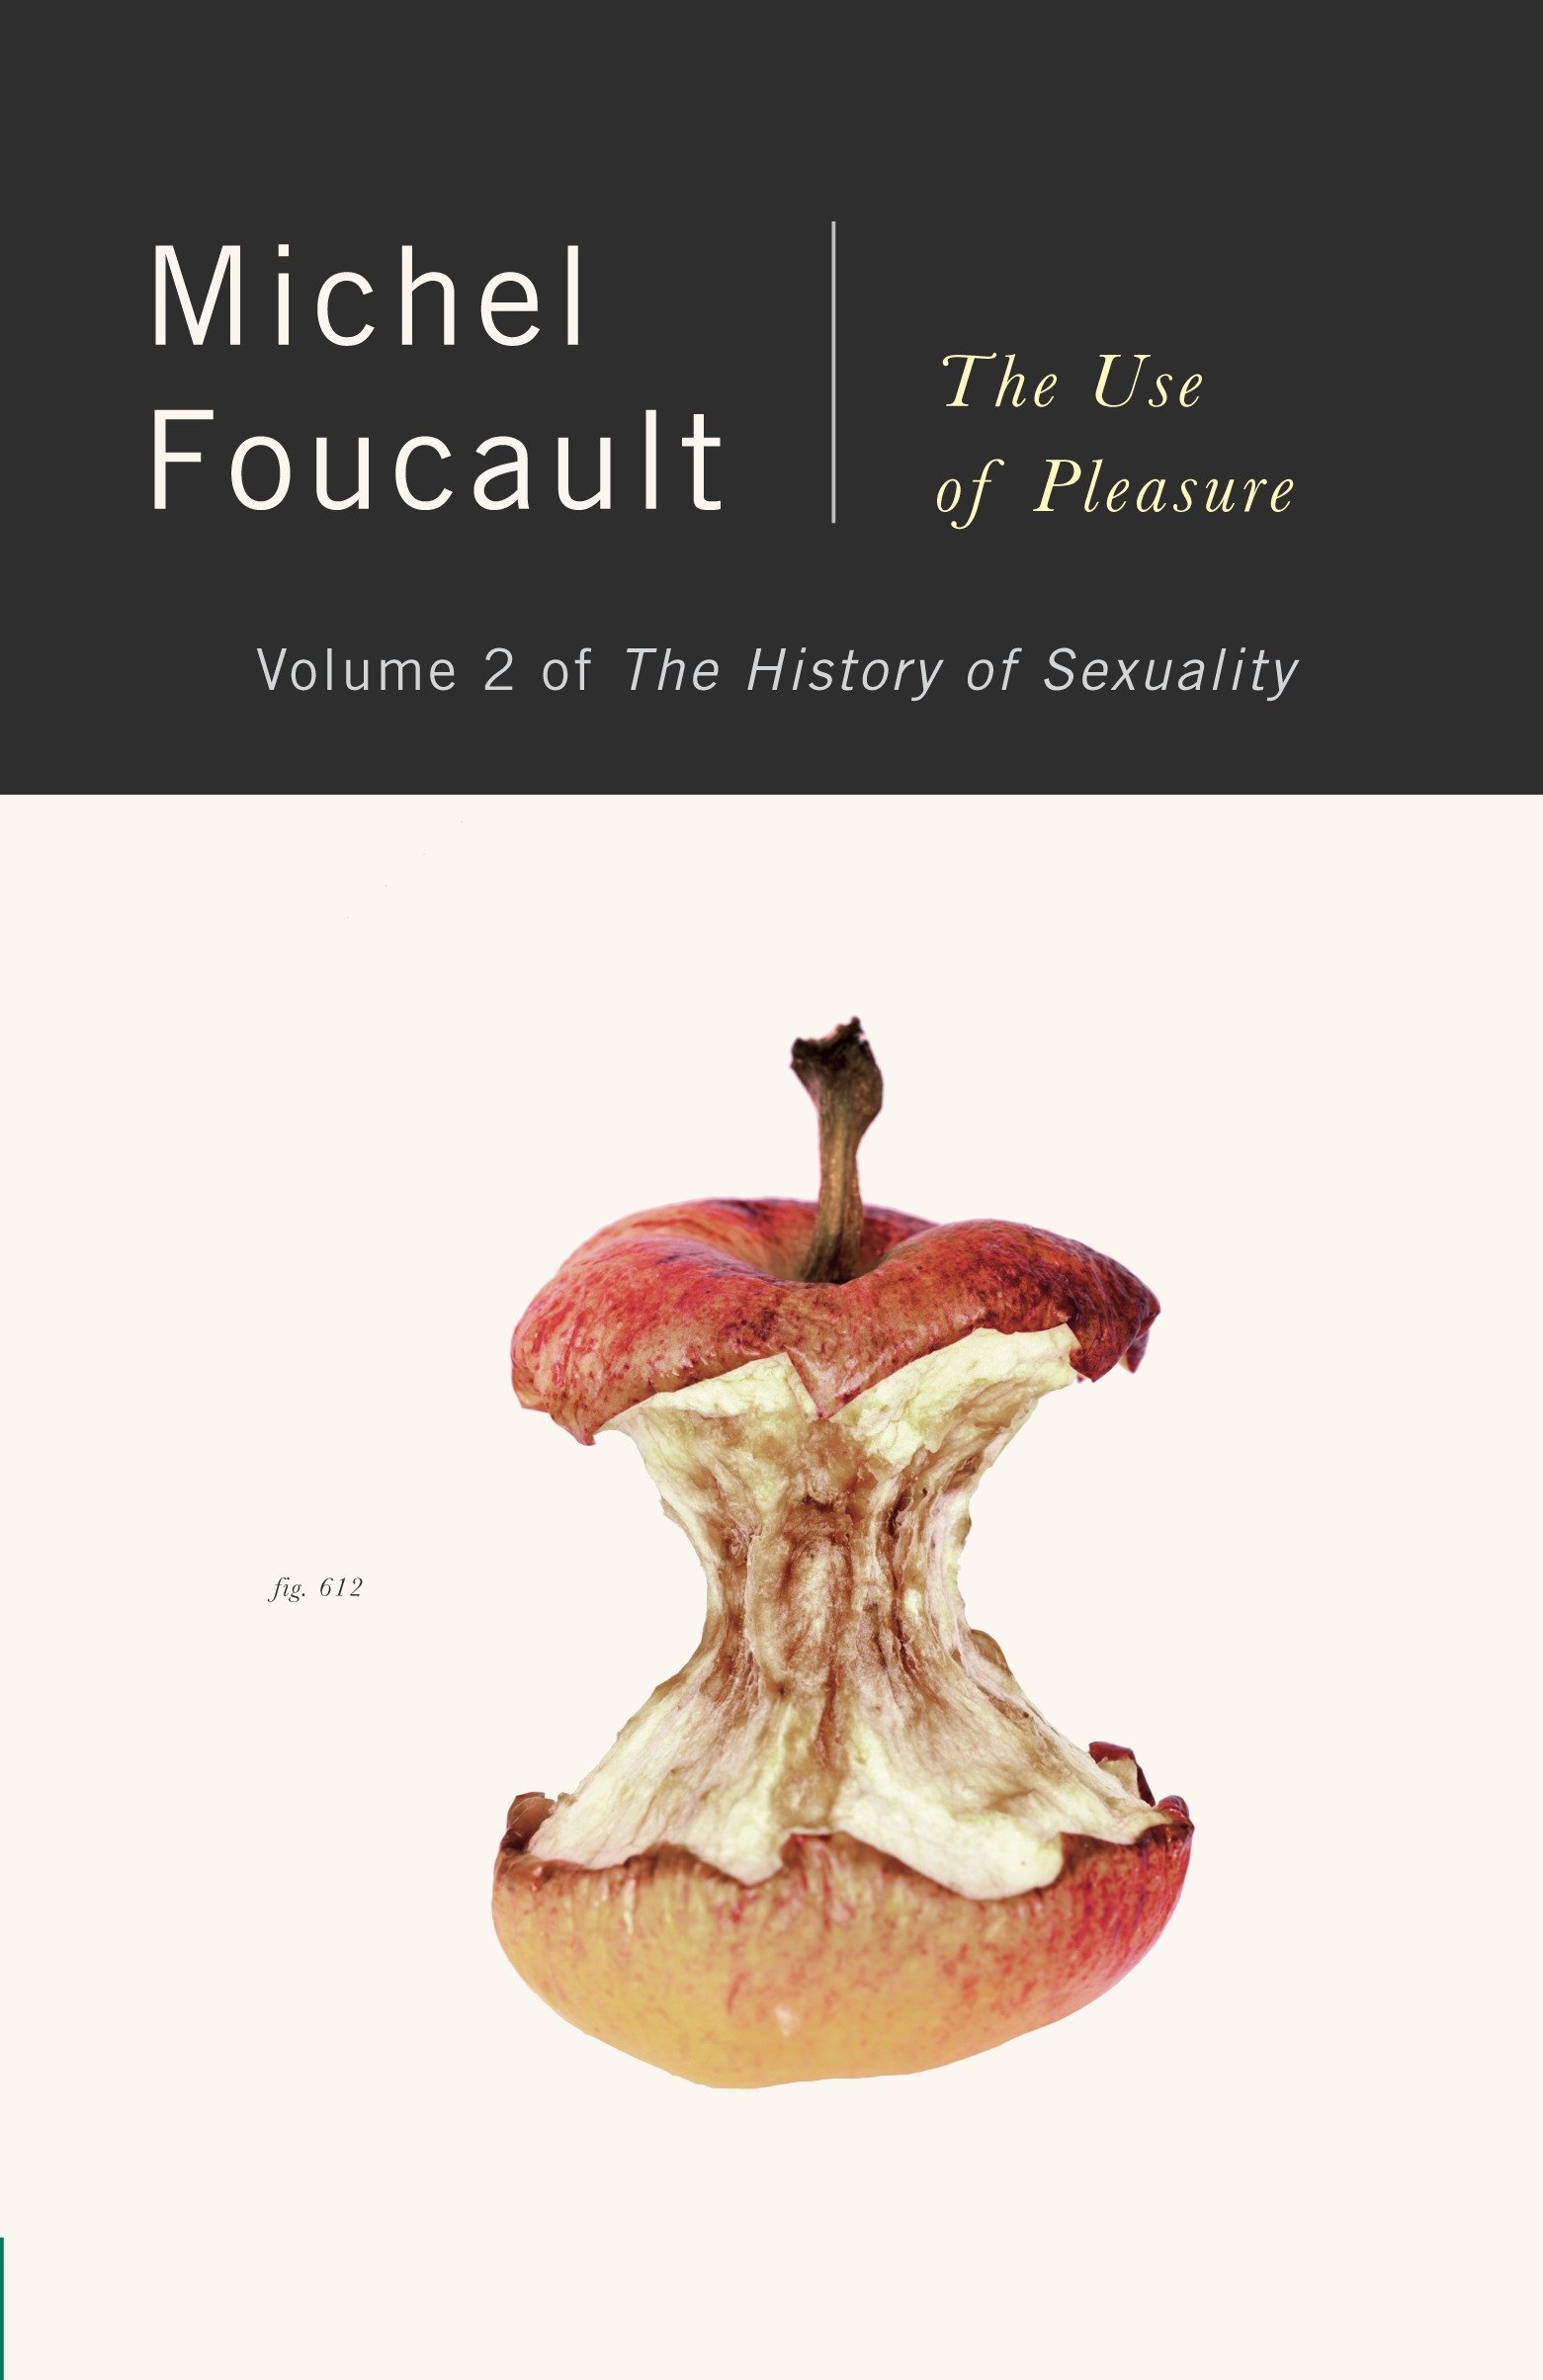 The History of Sexuality, Volume 2 (1986, Vintage)